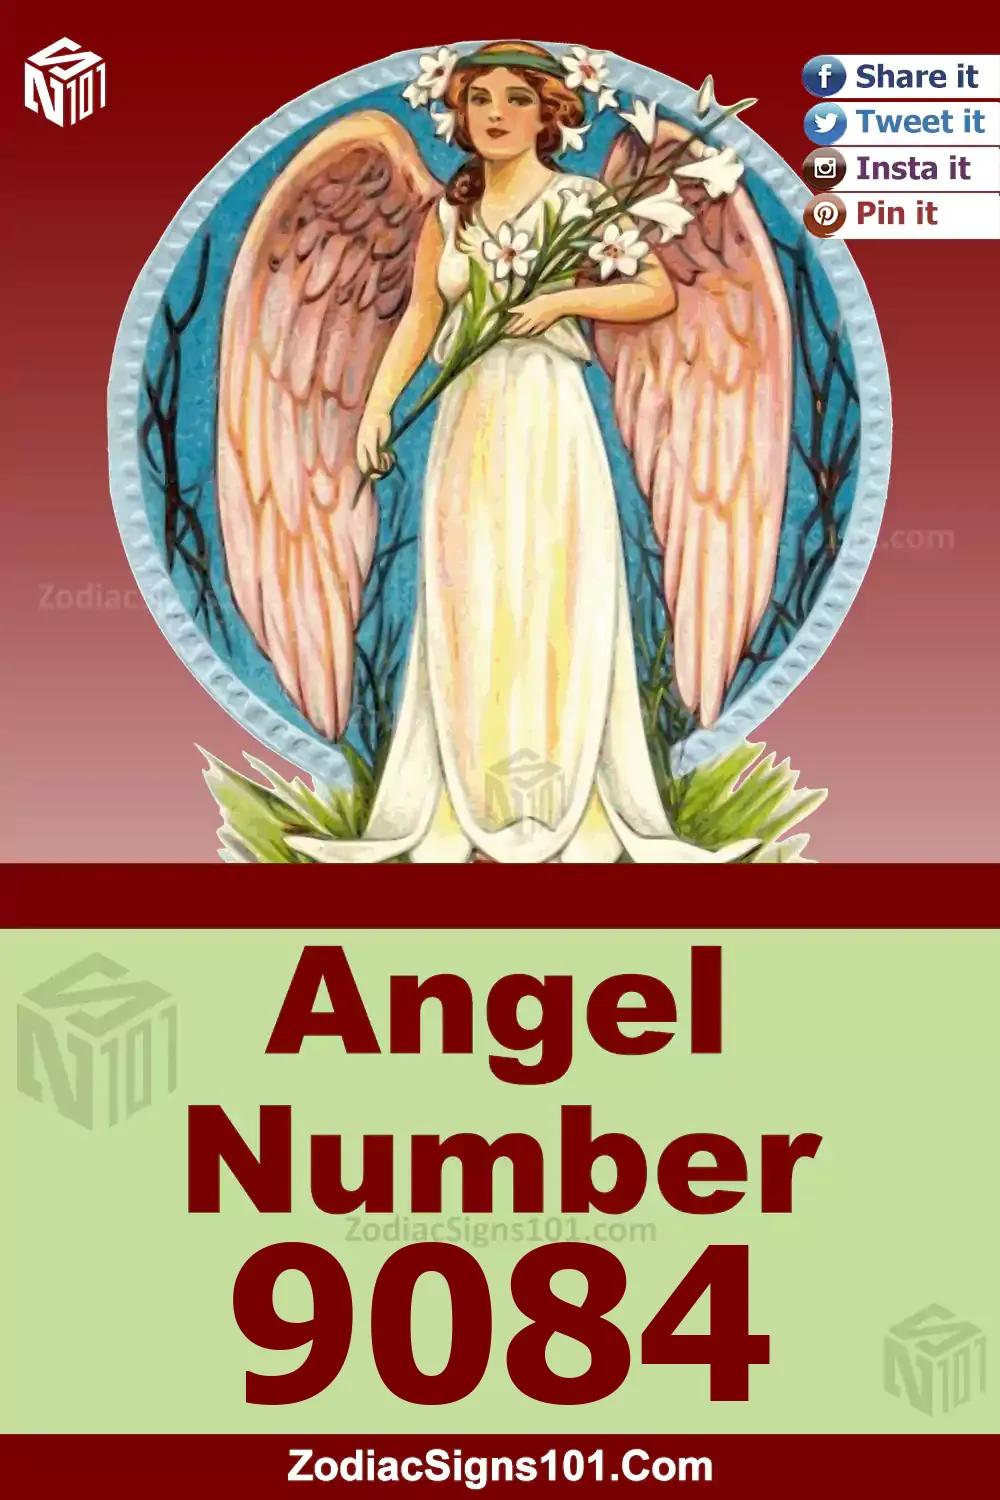 9084 Angel Number Meaning